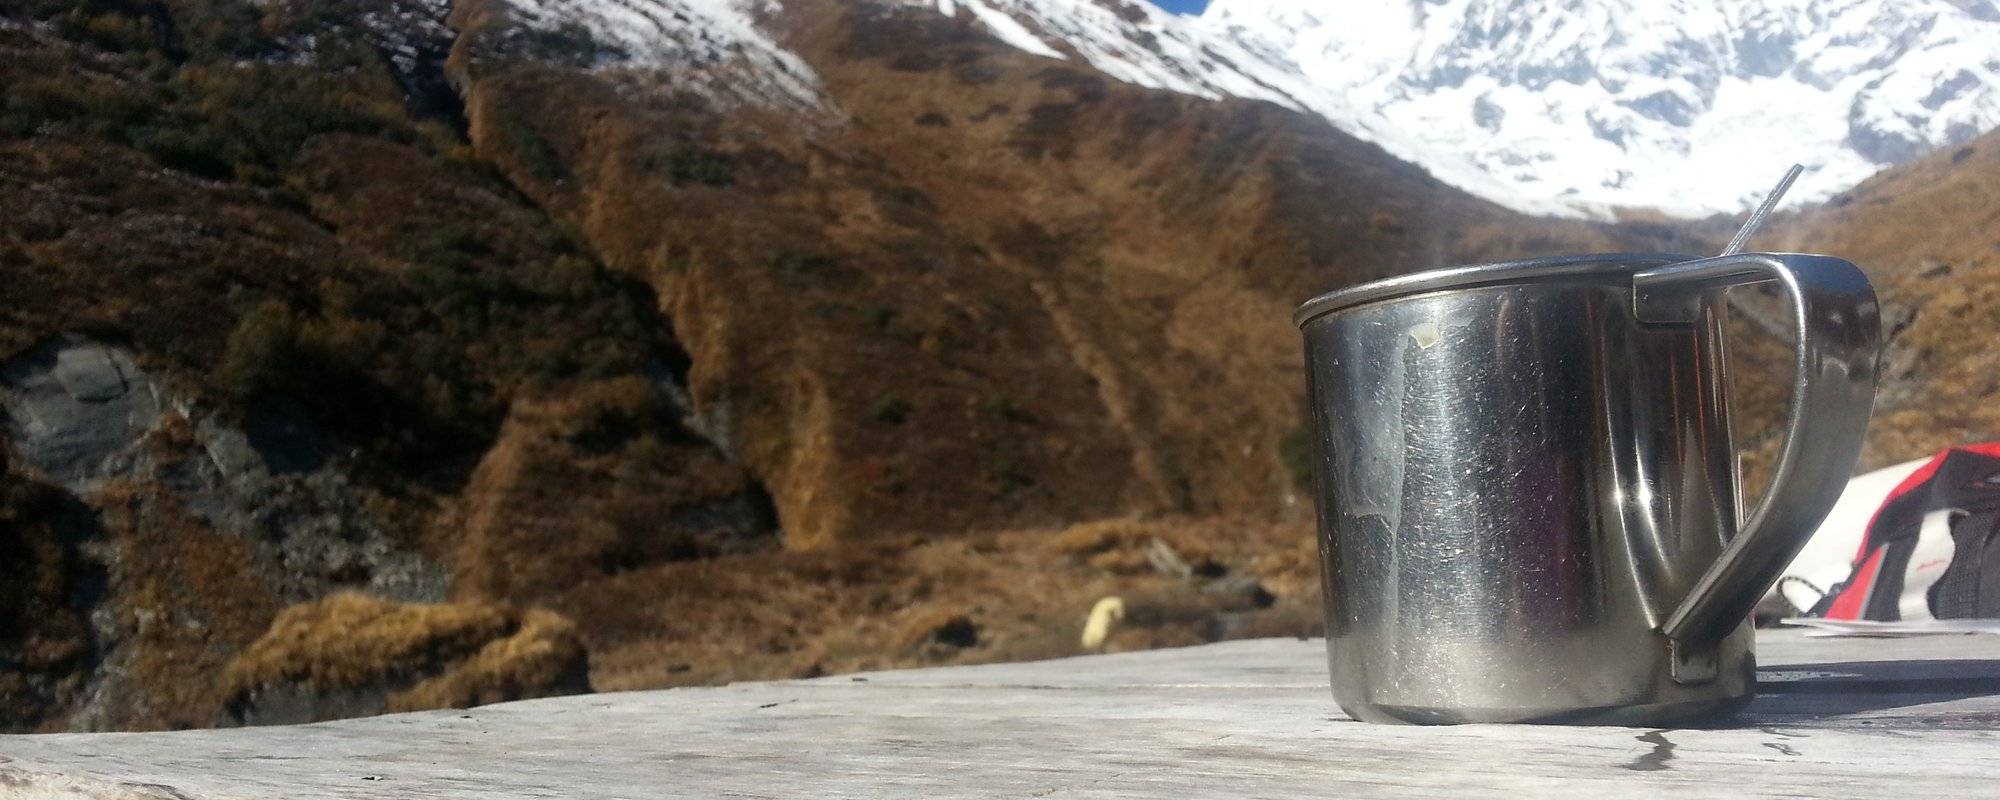 [The memories with 2 pictures] Annapurna Base Camp, Nepal